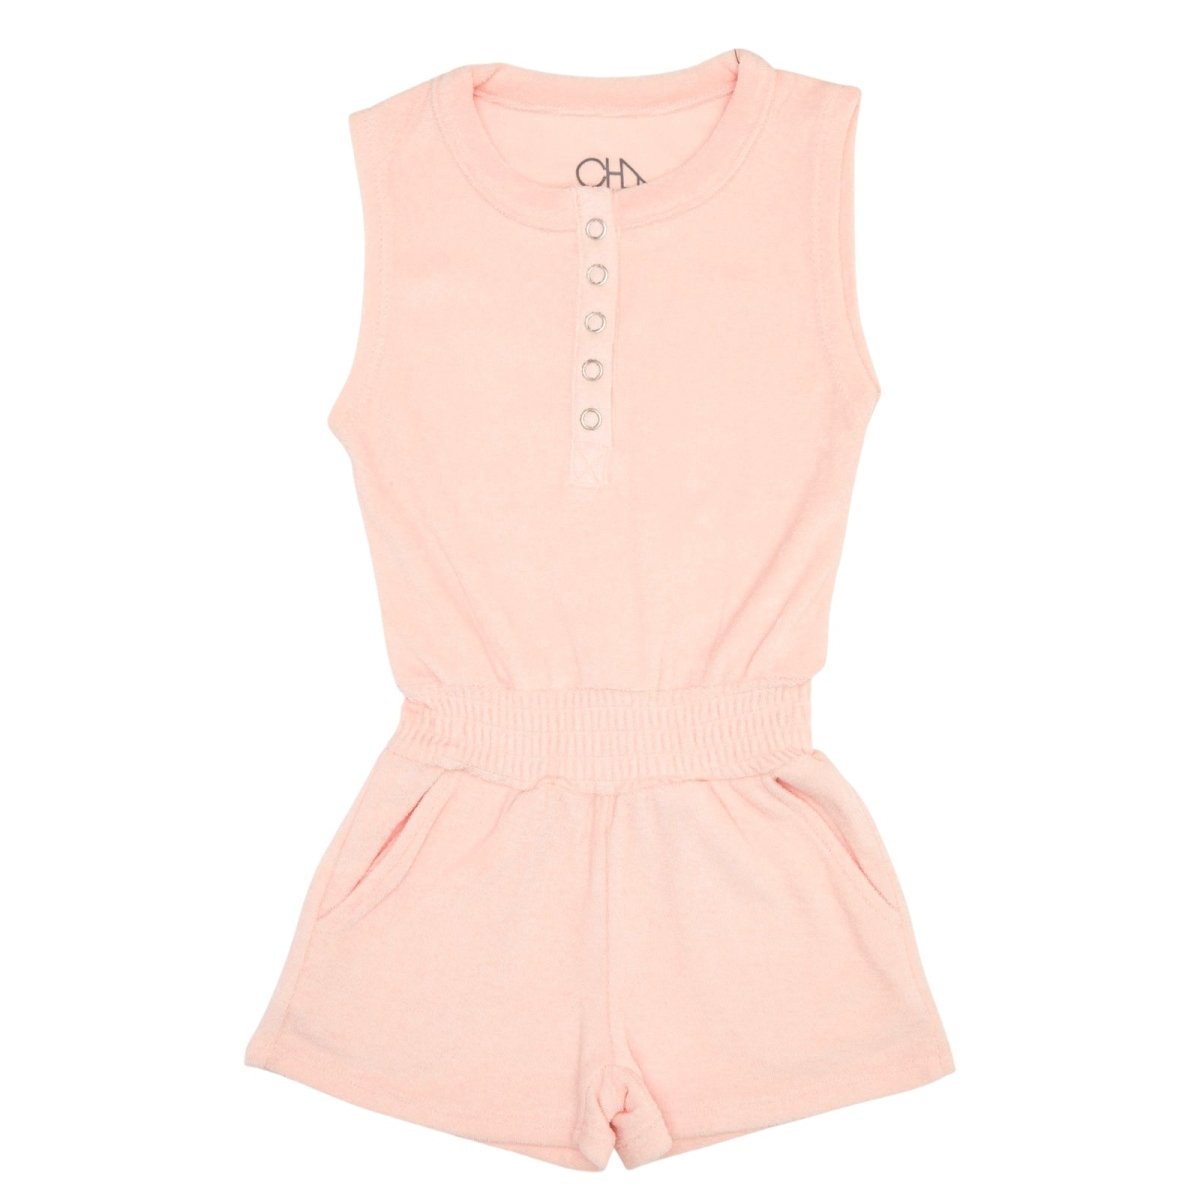 TERRY ROMPER - CHASER